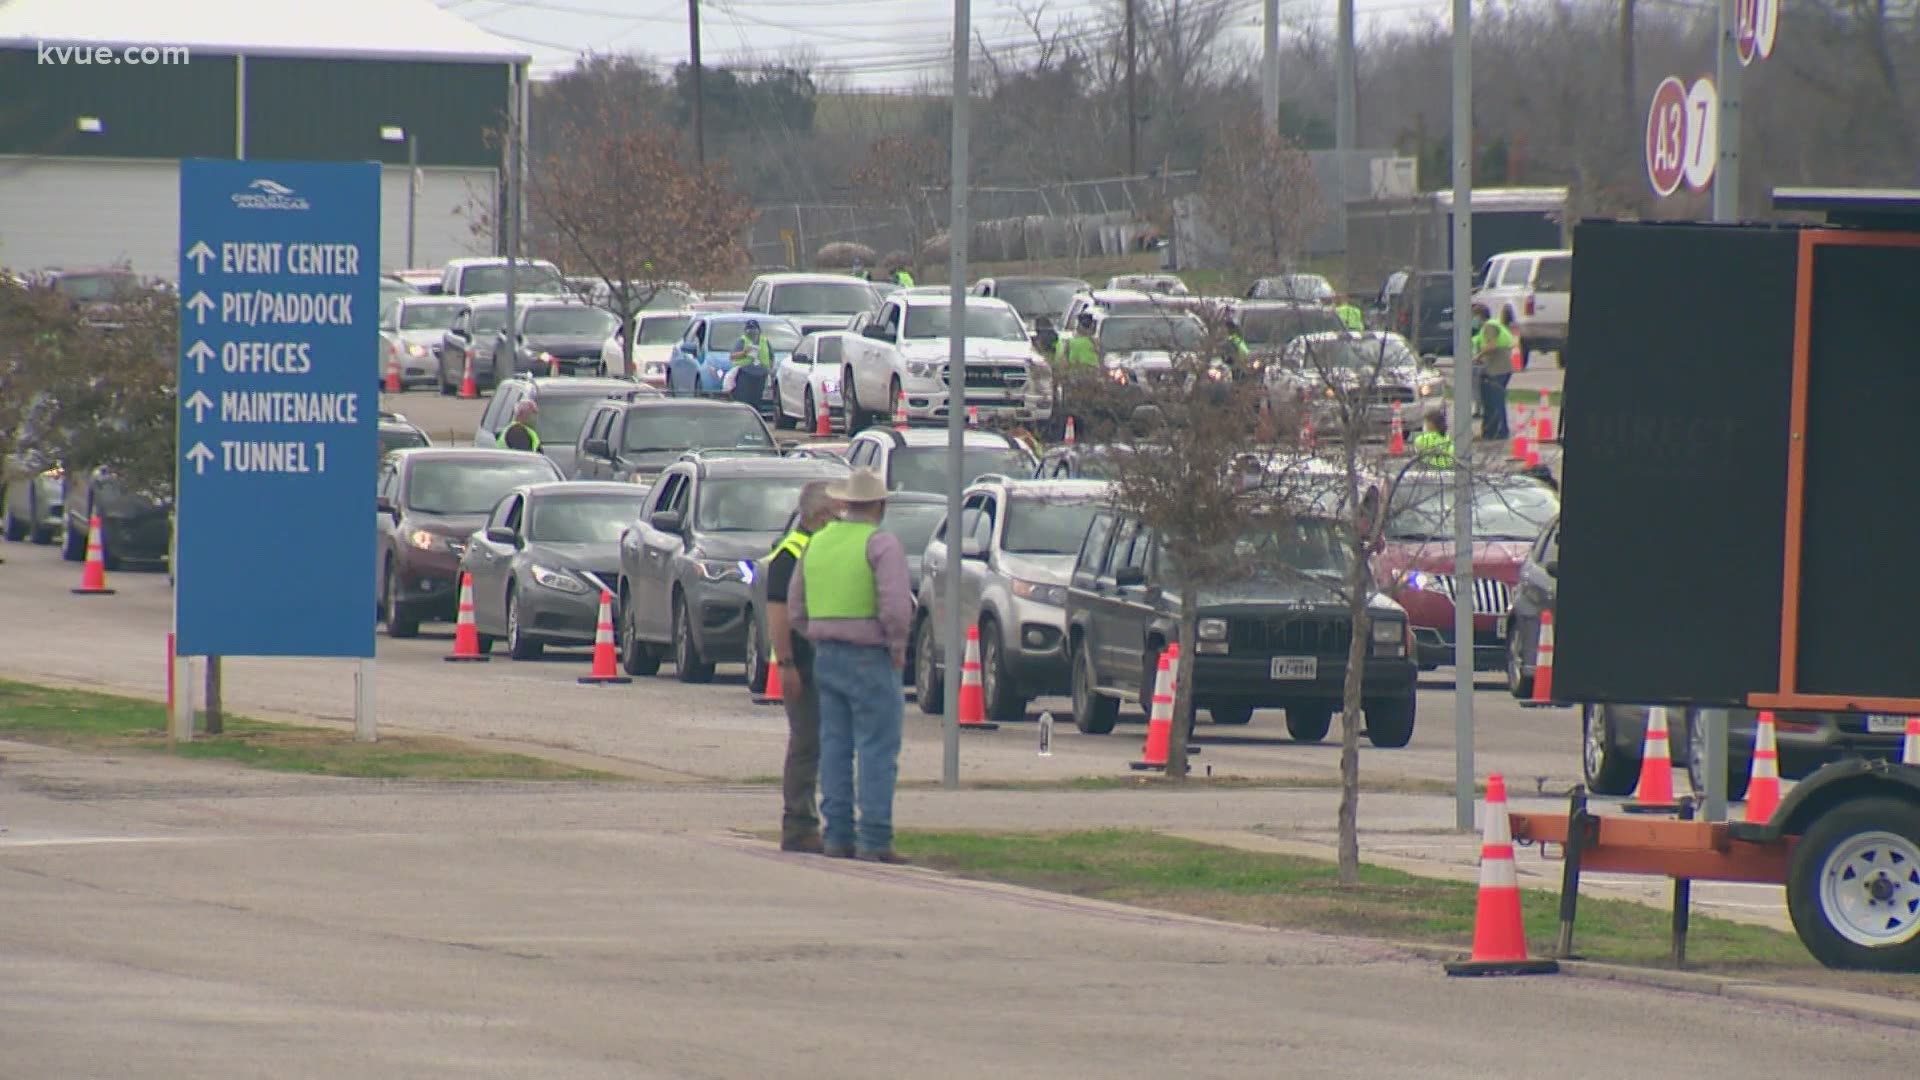 Leaders in Travis County are working to organize more drive-thru vaccination events like the one at the Circuit of the Americas.